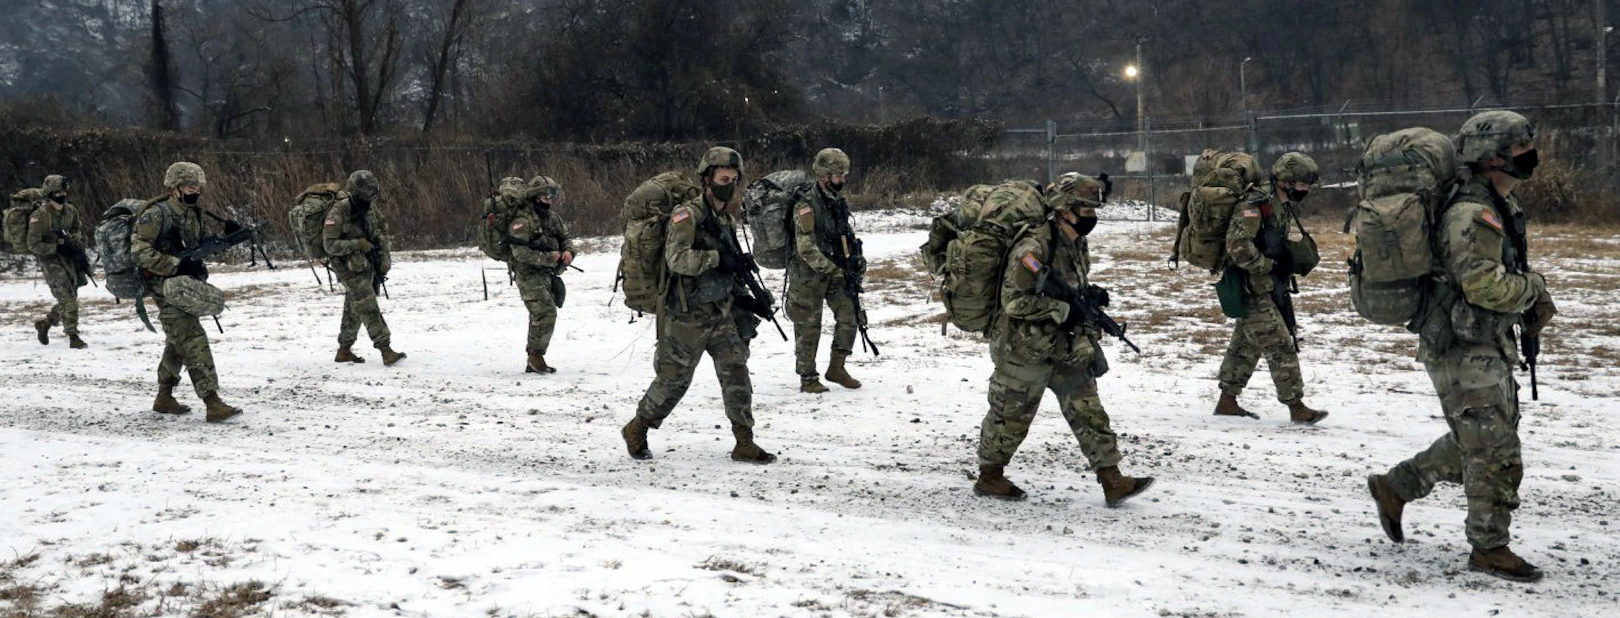 A group of armed soldiers - wearing armed suit and weapons - walking in the snow.